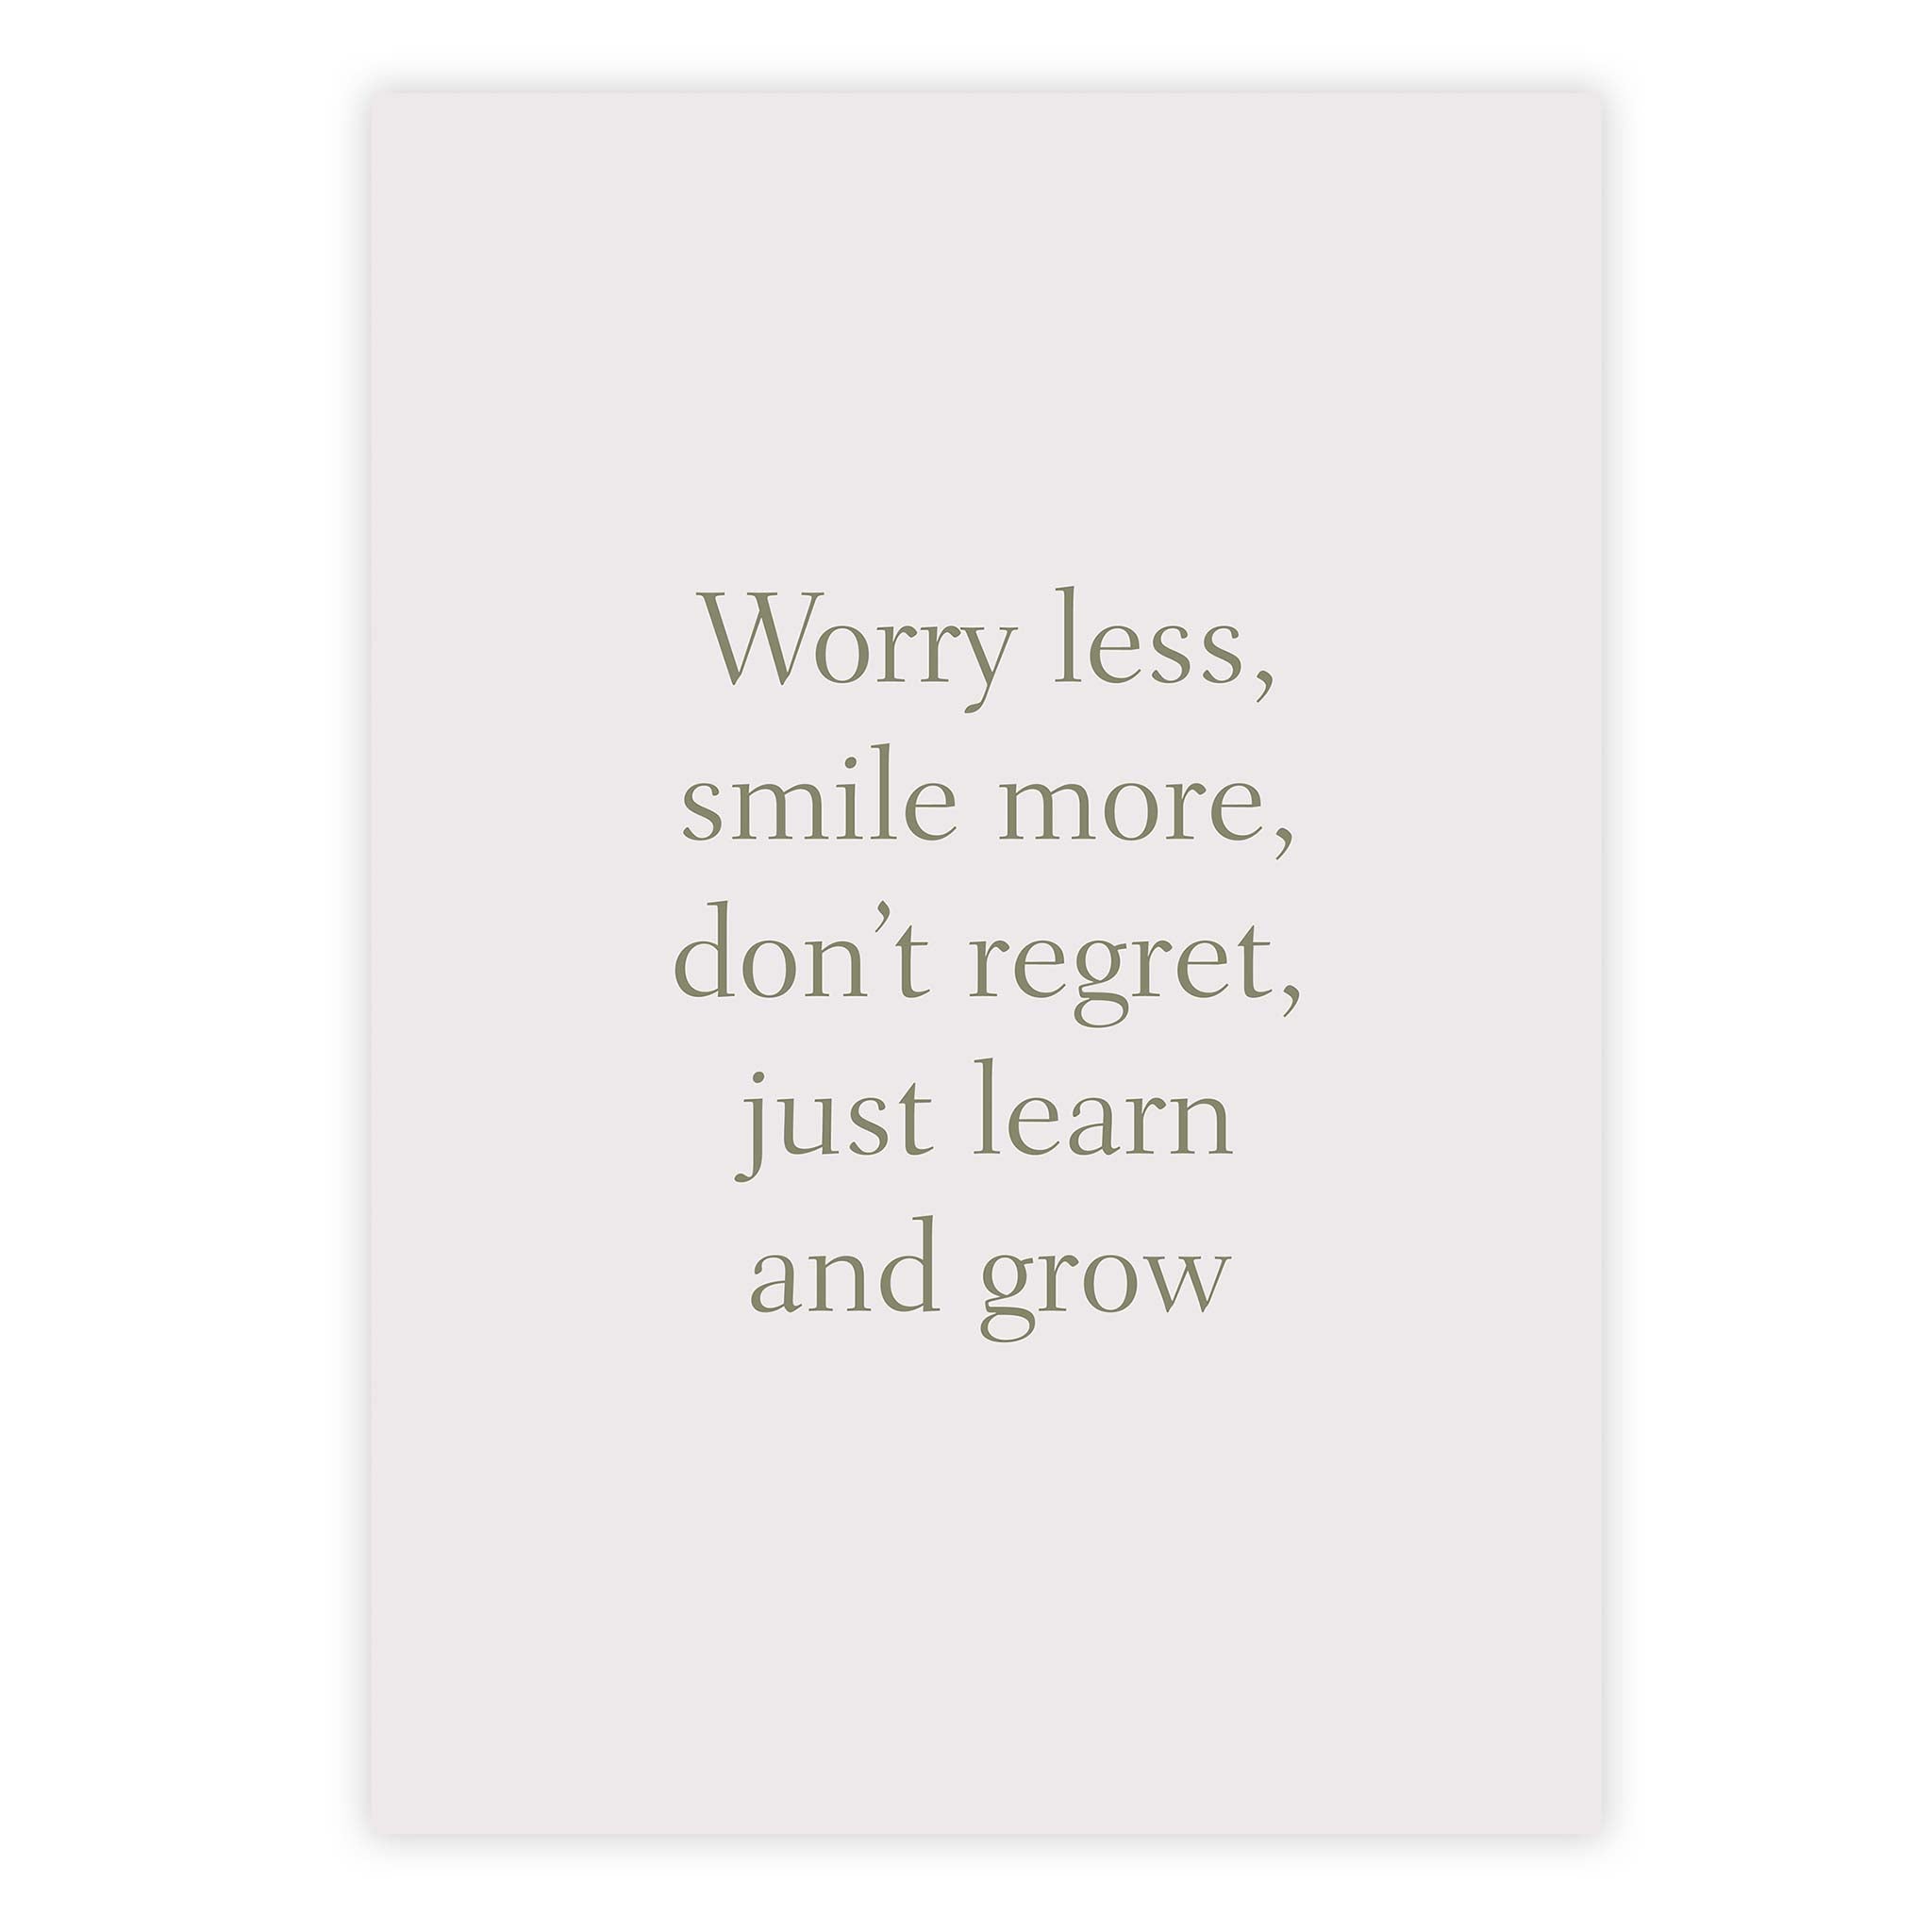 Worry less, smile more, don’t regret, just learn and grow